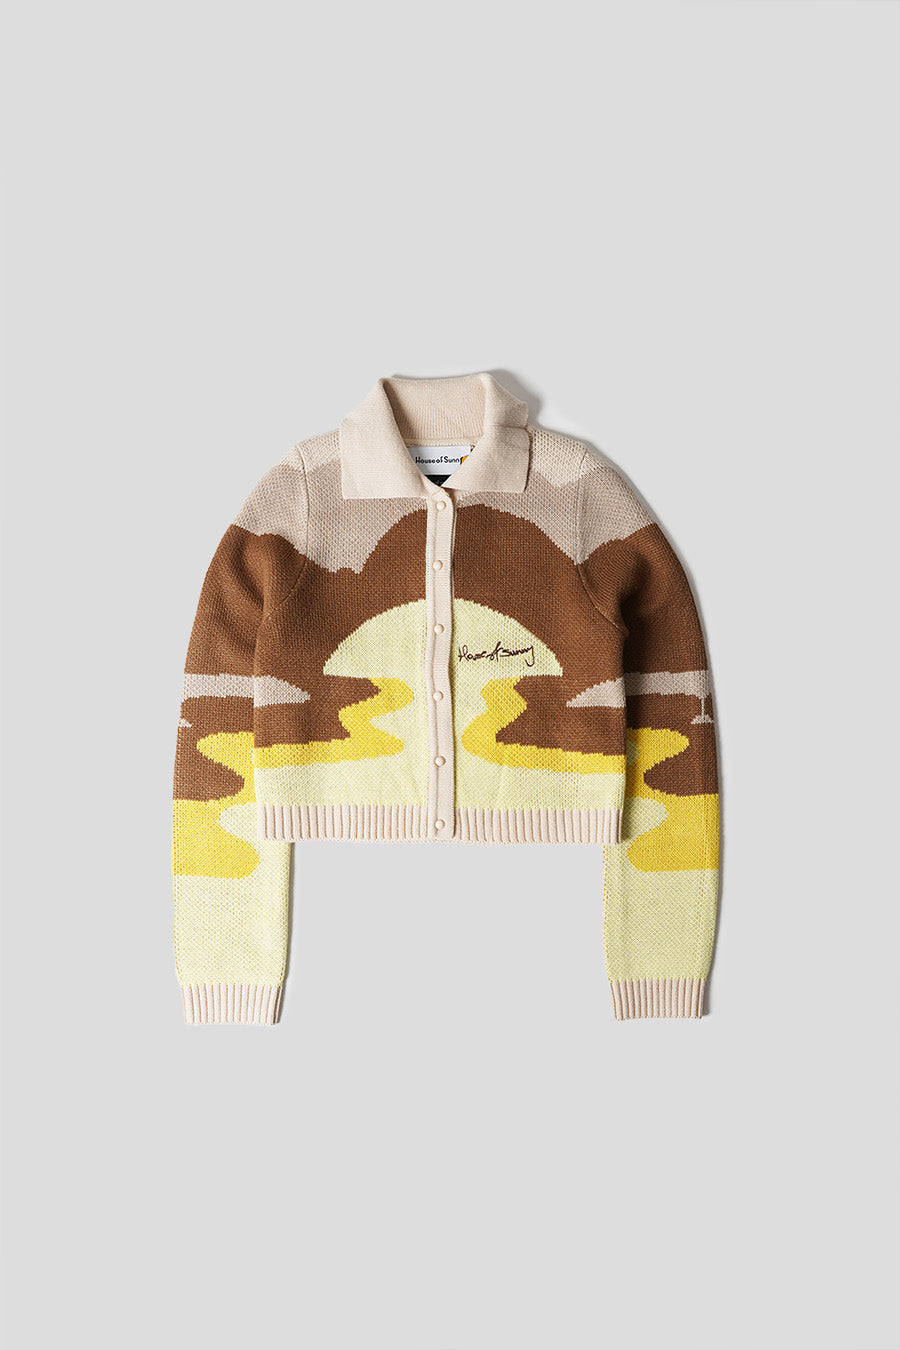 house of sunny - KNITTED JUMPER WITH MULTI CREAM SHIRT COLLAR - LE LABO STORE